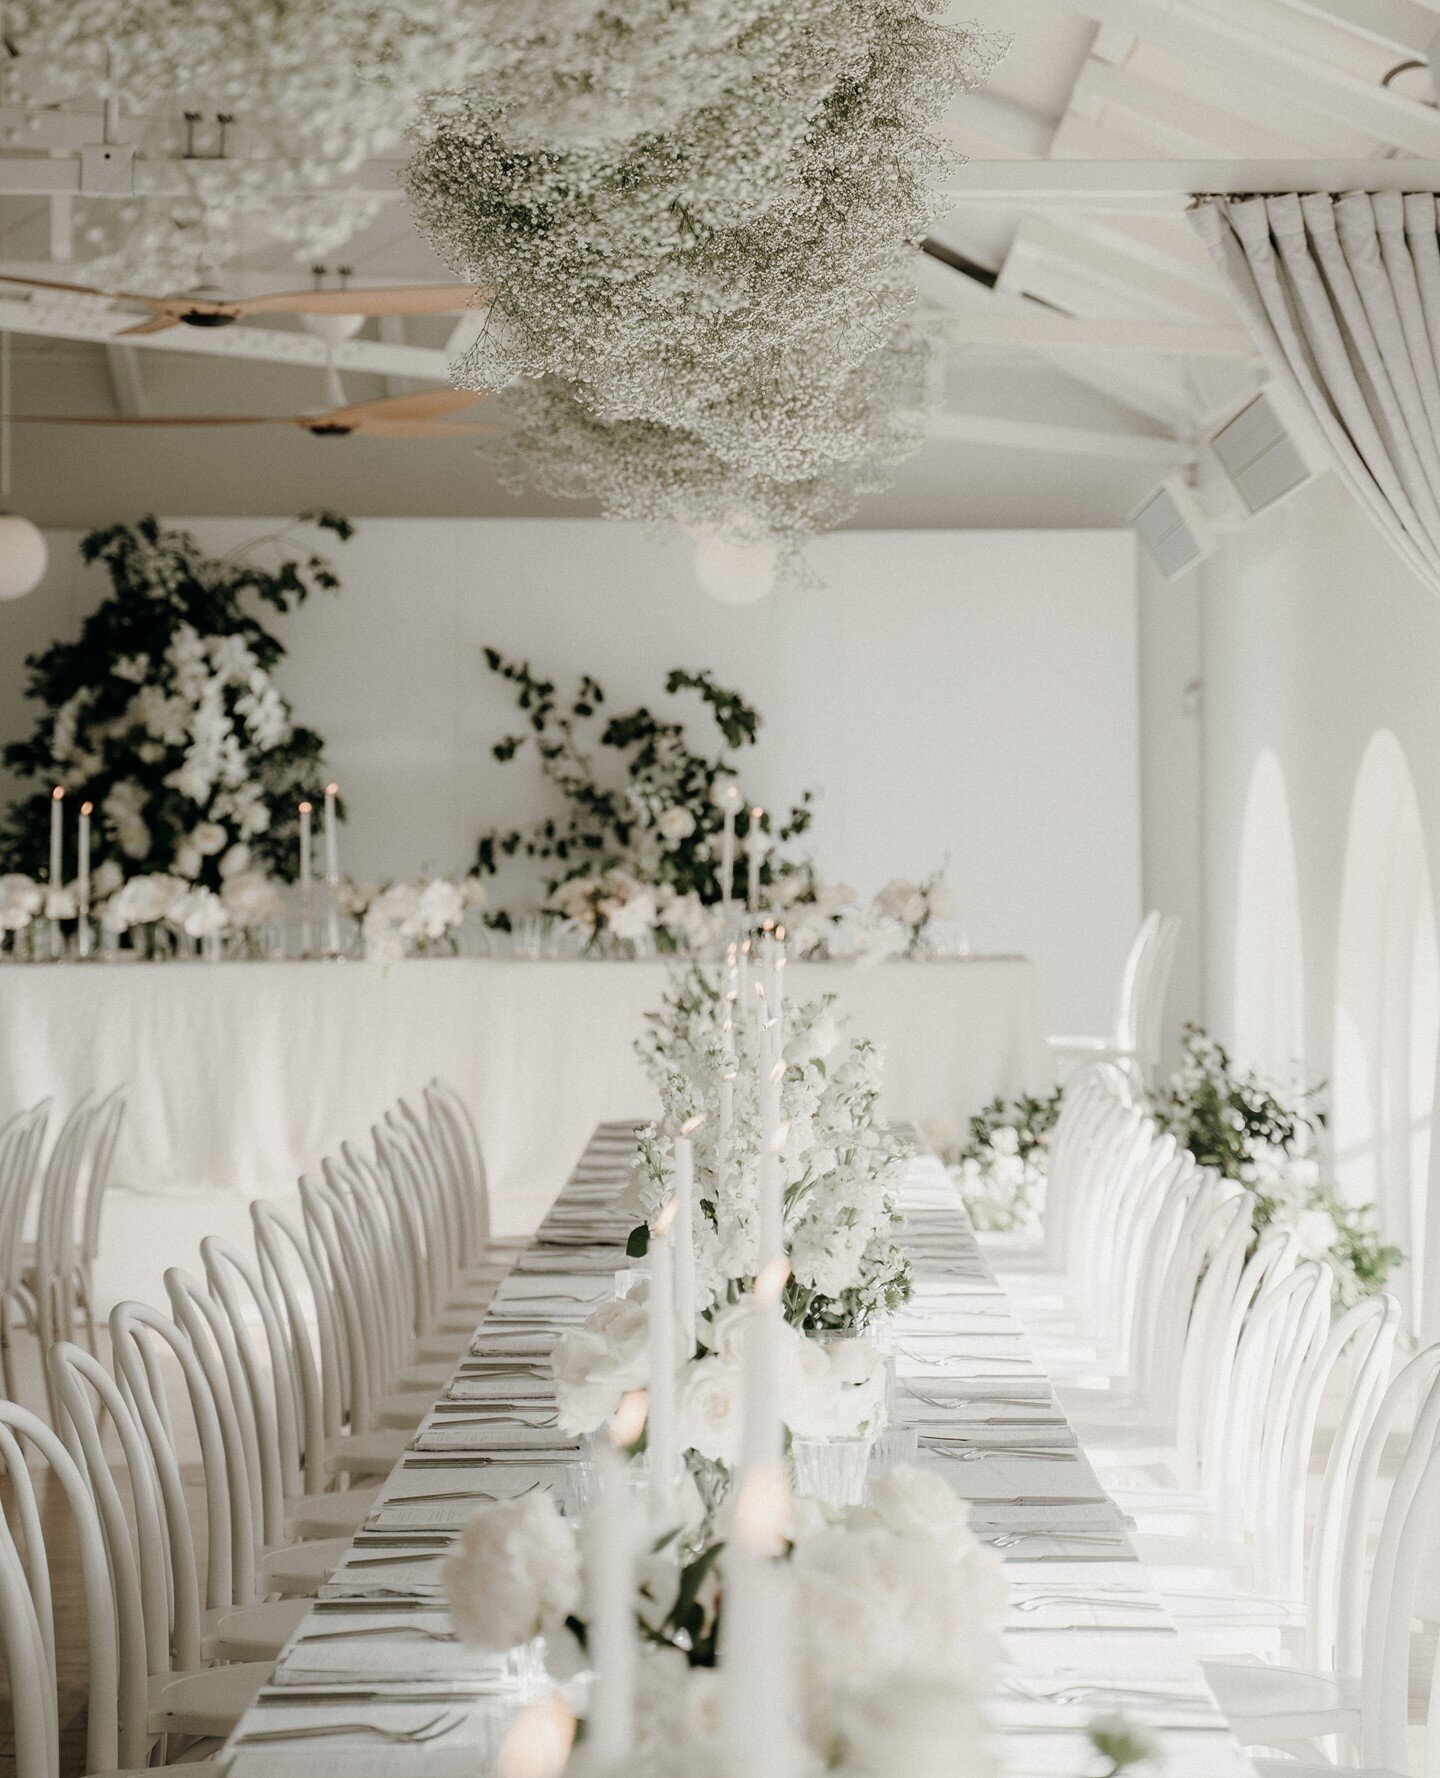 White on White on White.⁠
⁠
If you ever needed some inspiration for an all-white colour scheme at your wedding then this is it. ⁠
⁠
White florals accented by hints green, is the perfect option for stunningly elegant and luxurious wedding decor 🕊️⁠
⁠